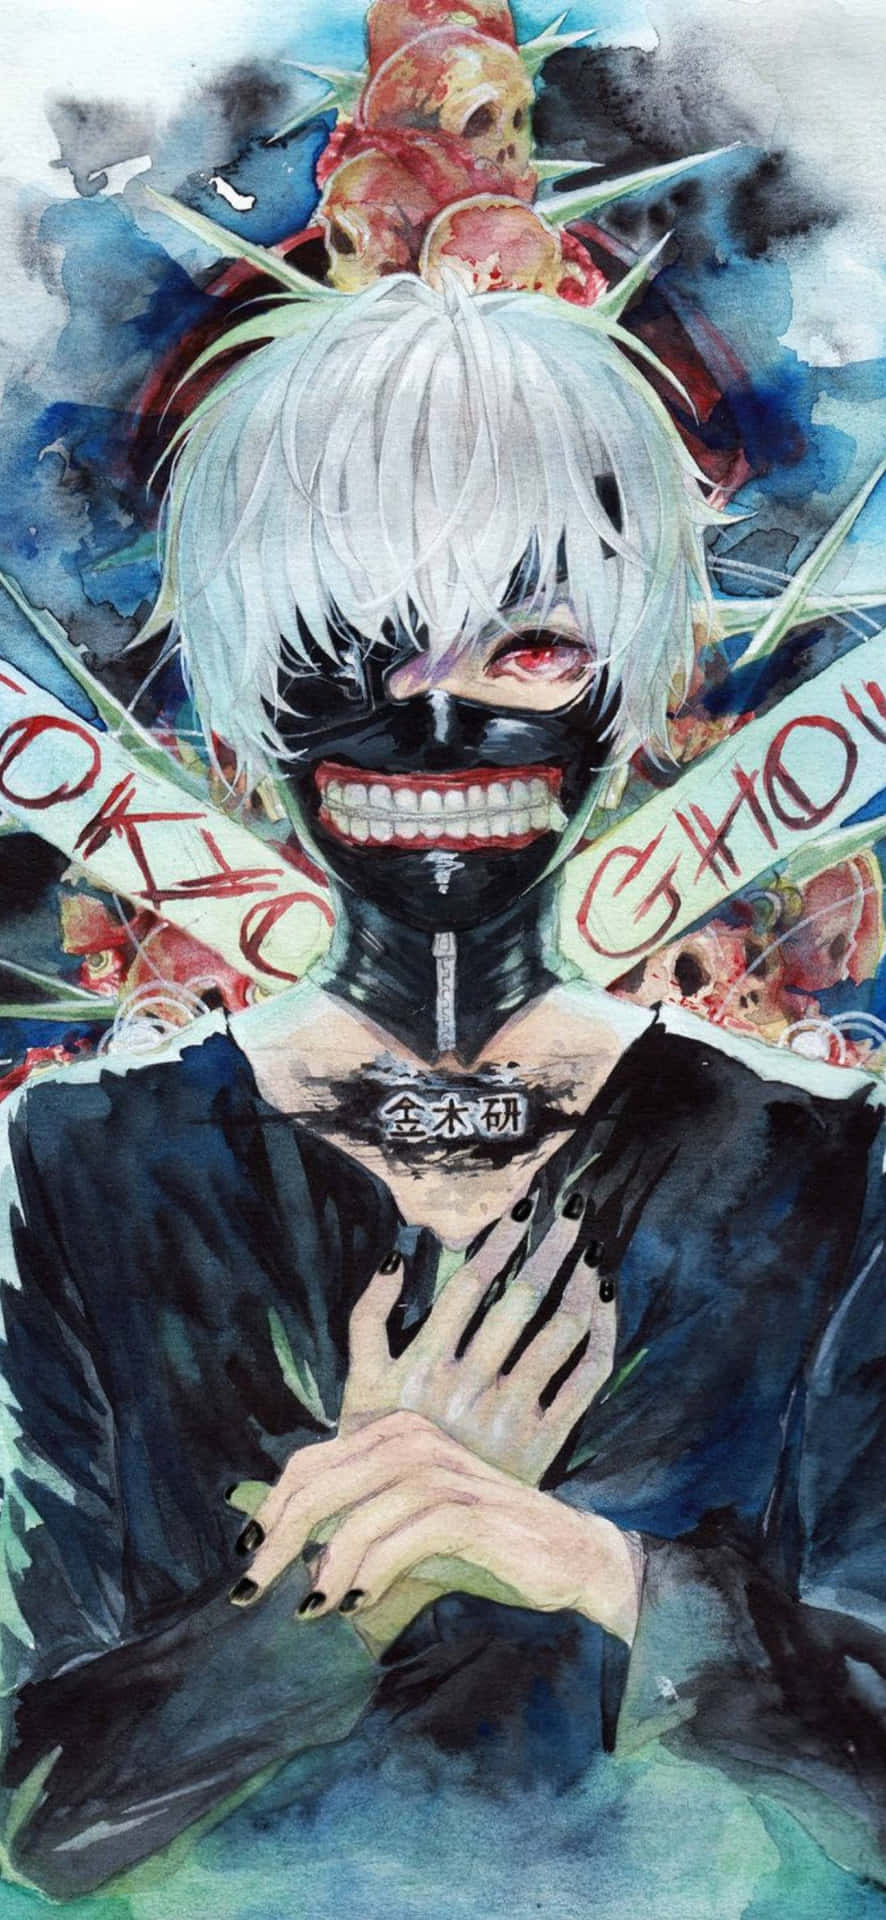 A Painting Of A Man With White Hair And A Mask Wallpaper